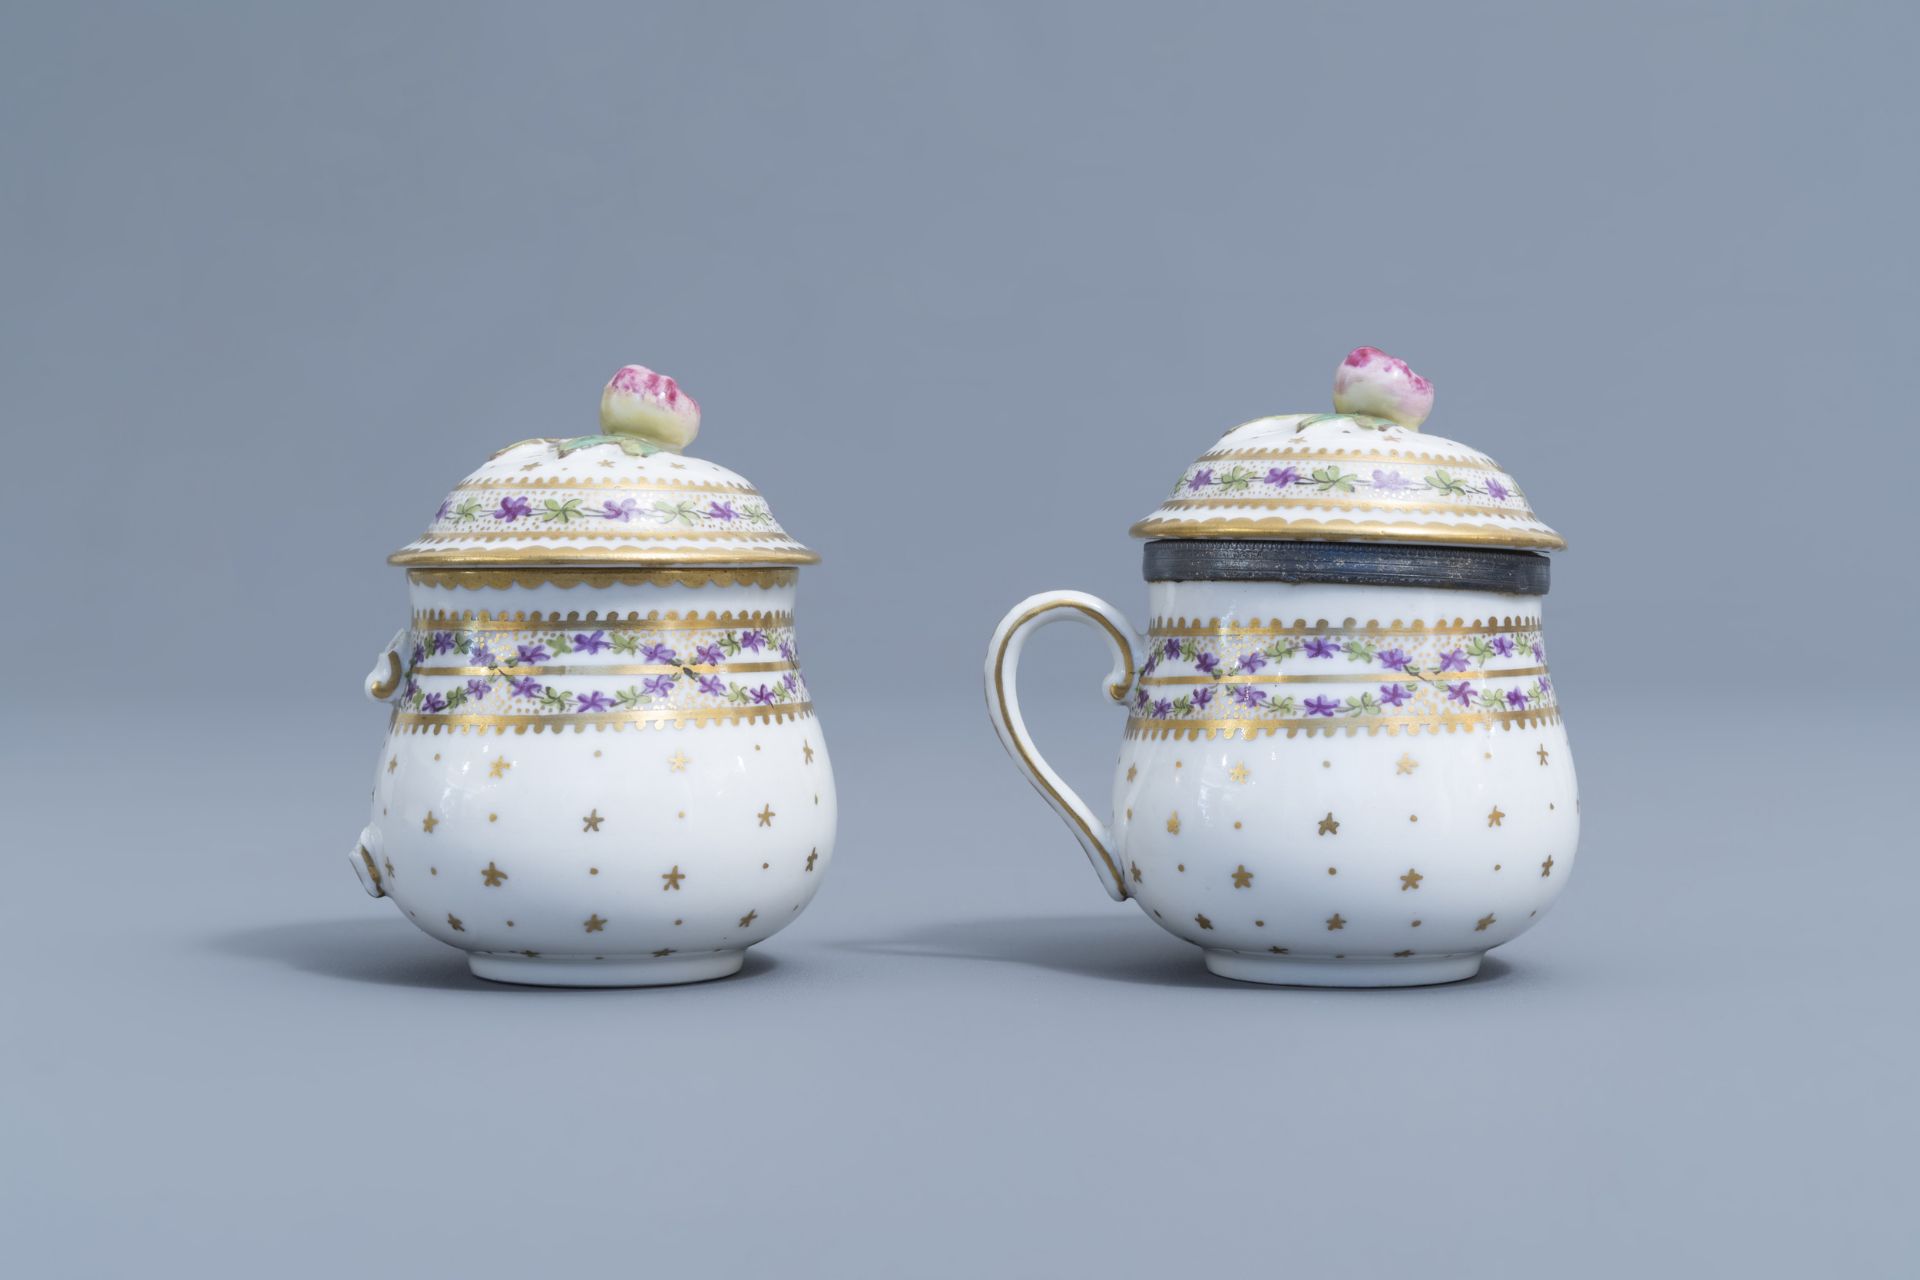 A pair of bue and white faience fine salts and five cream jars, Luxemburg and France, 18th/19th C. - Image 19 of 46